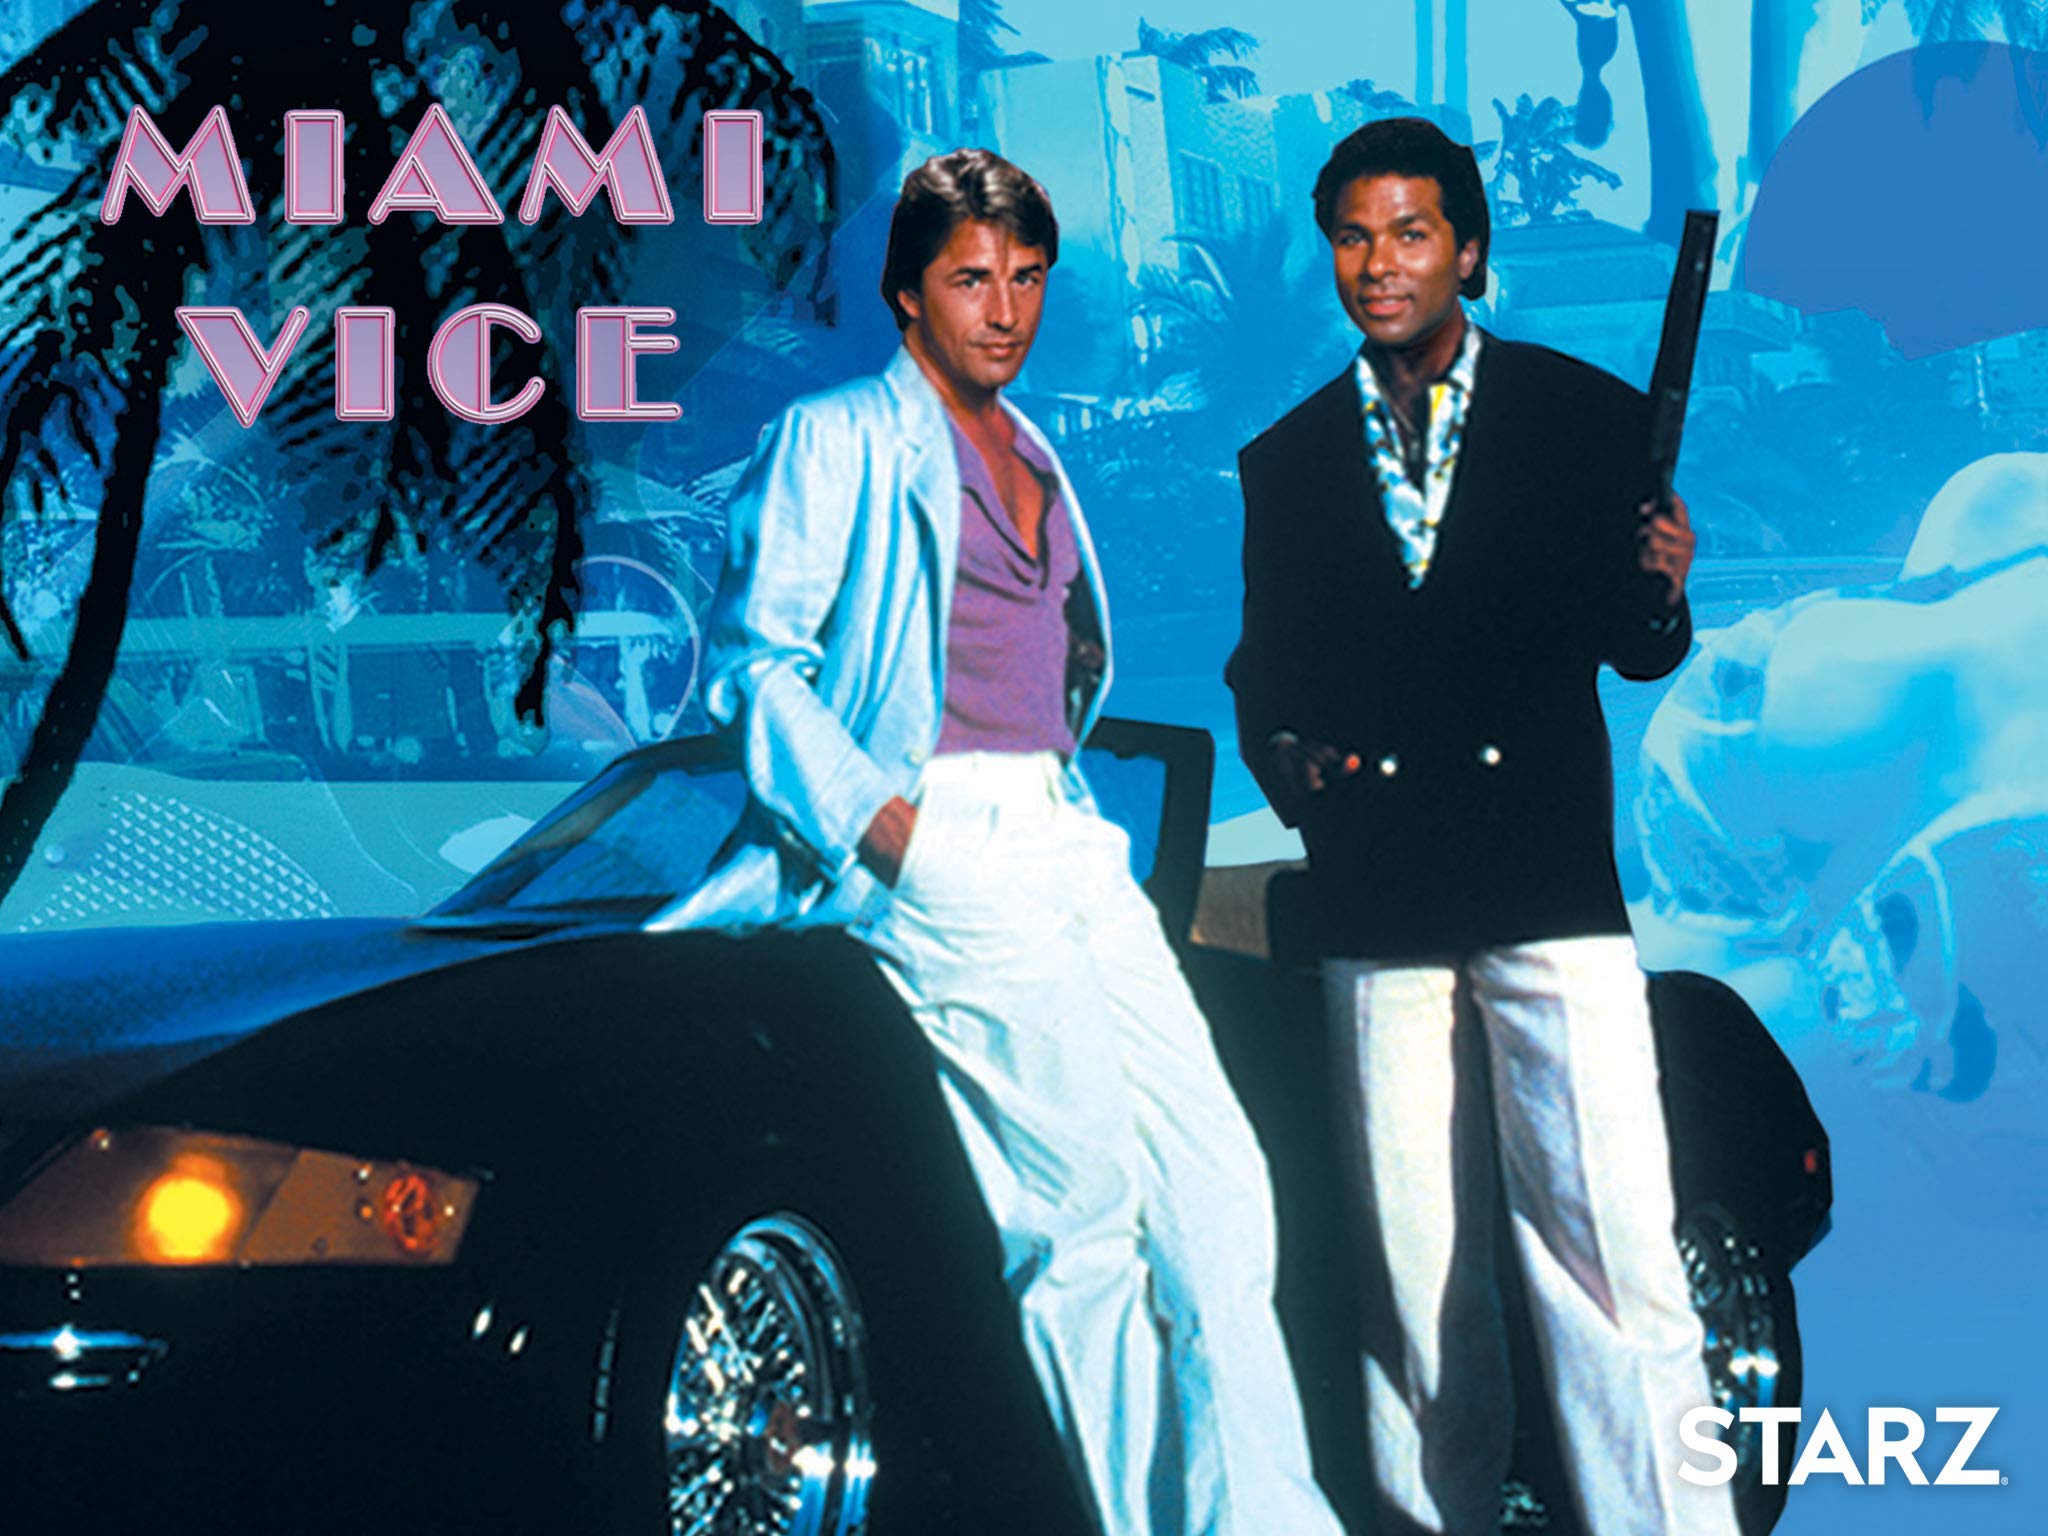 The font, the car, the cut of those trousers - there’s a… style to it. Who’d have thought the process of making Miami Vice would be so useful in creating theatre. Pic shows two men, one white and one African-American, in 70s clothes leaning on a sports car.